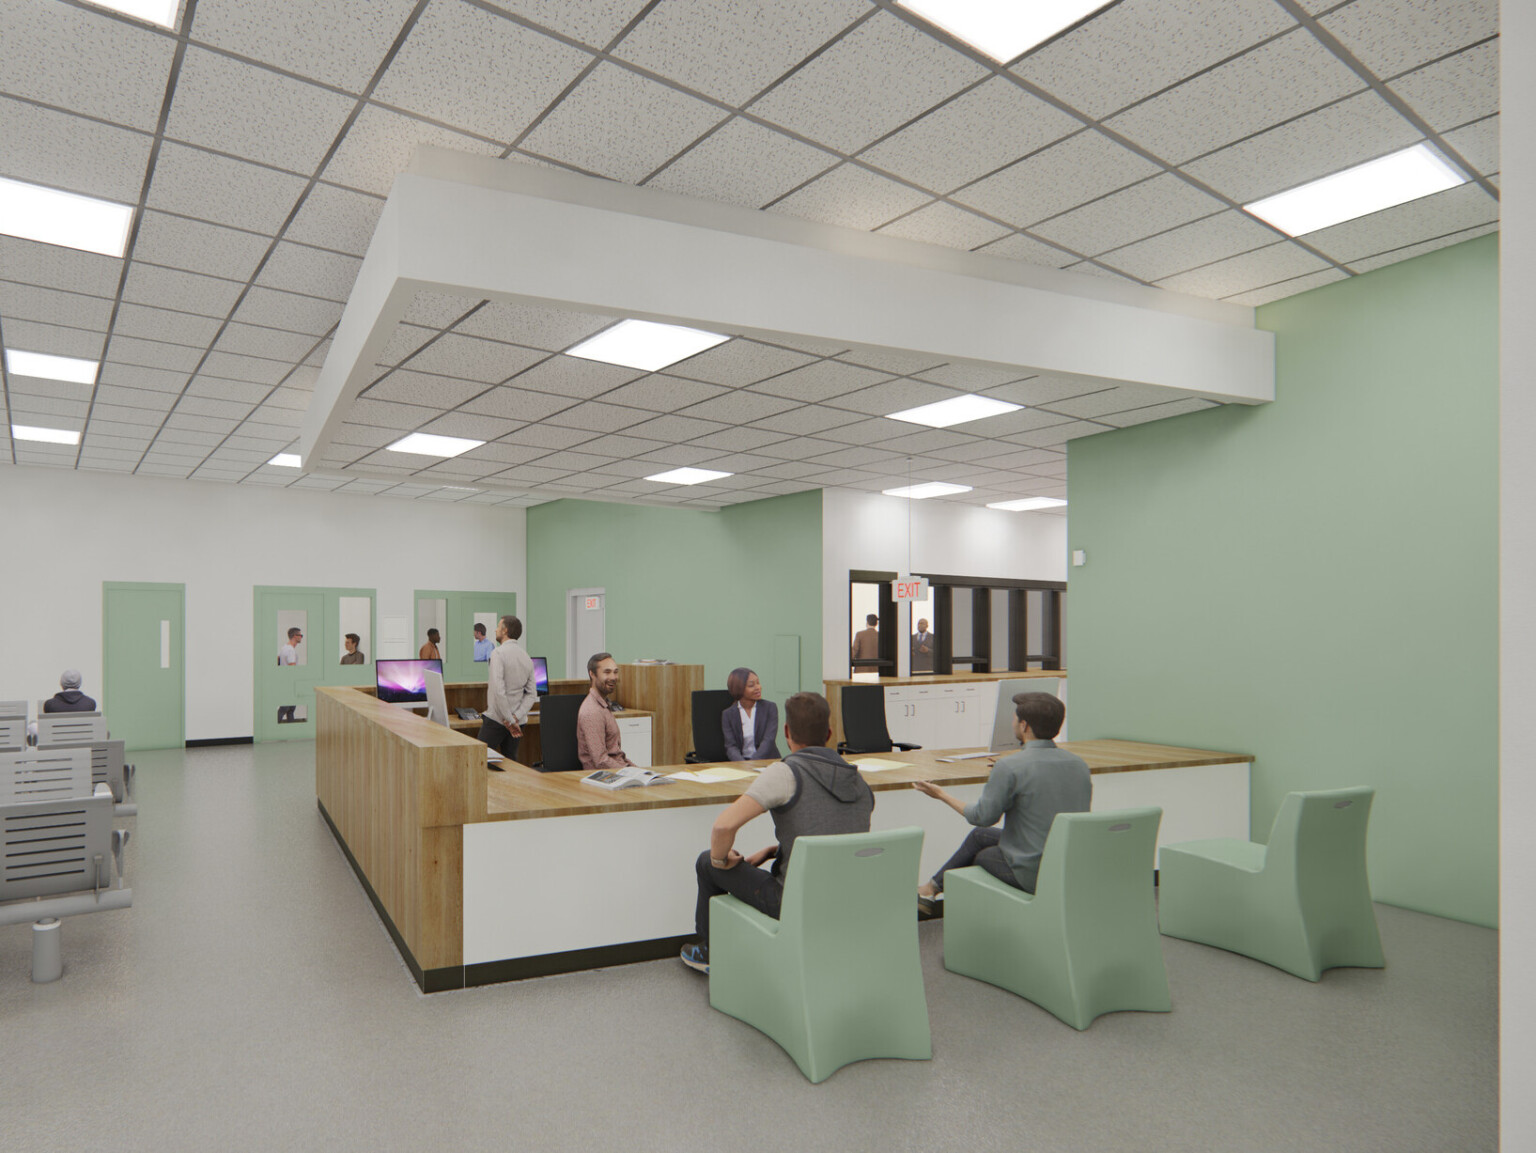 Yavapai County Criminal Justice Center open concept work area with modular chairs and desks